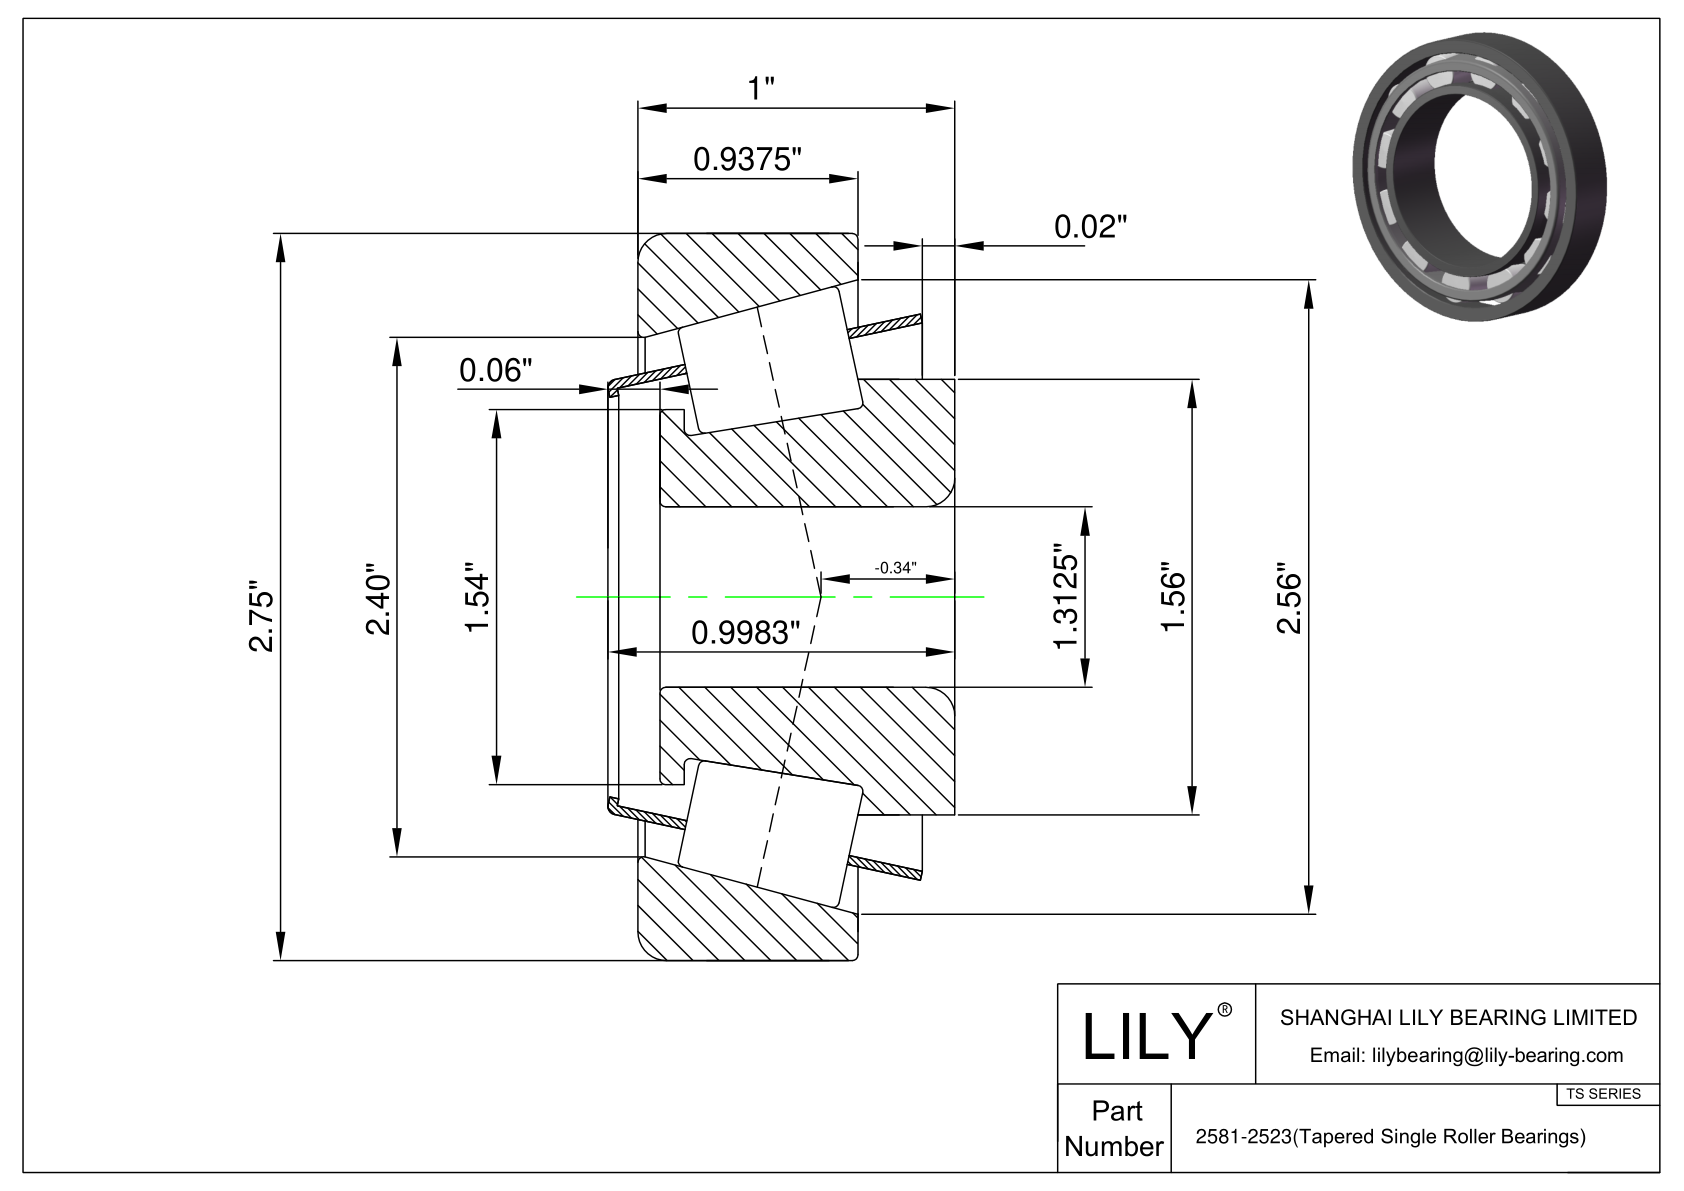 2581-2523 TS (Tapered Single Roller Bearings) (Imperial) cad drawing